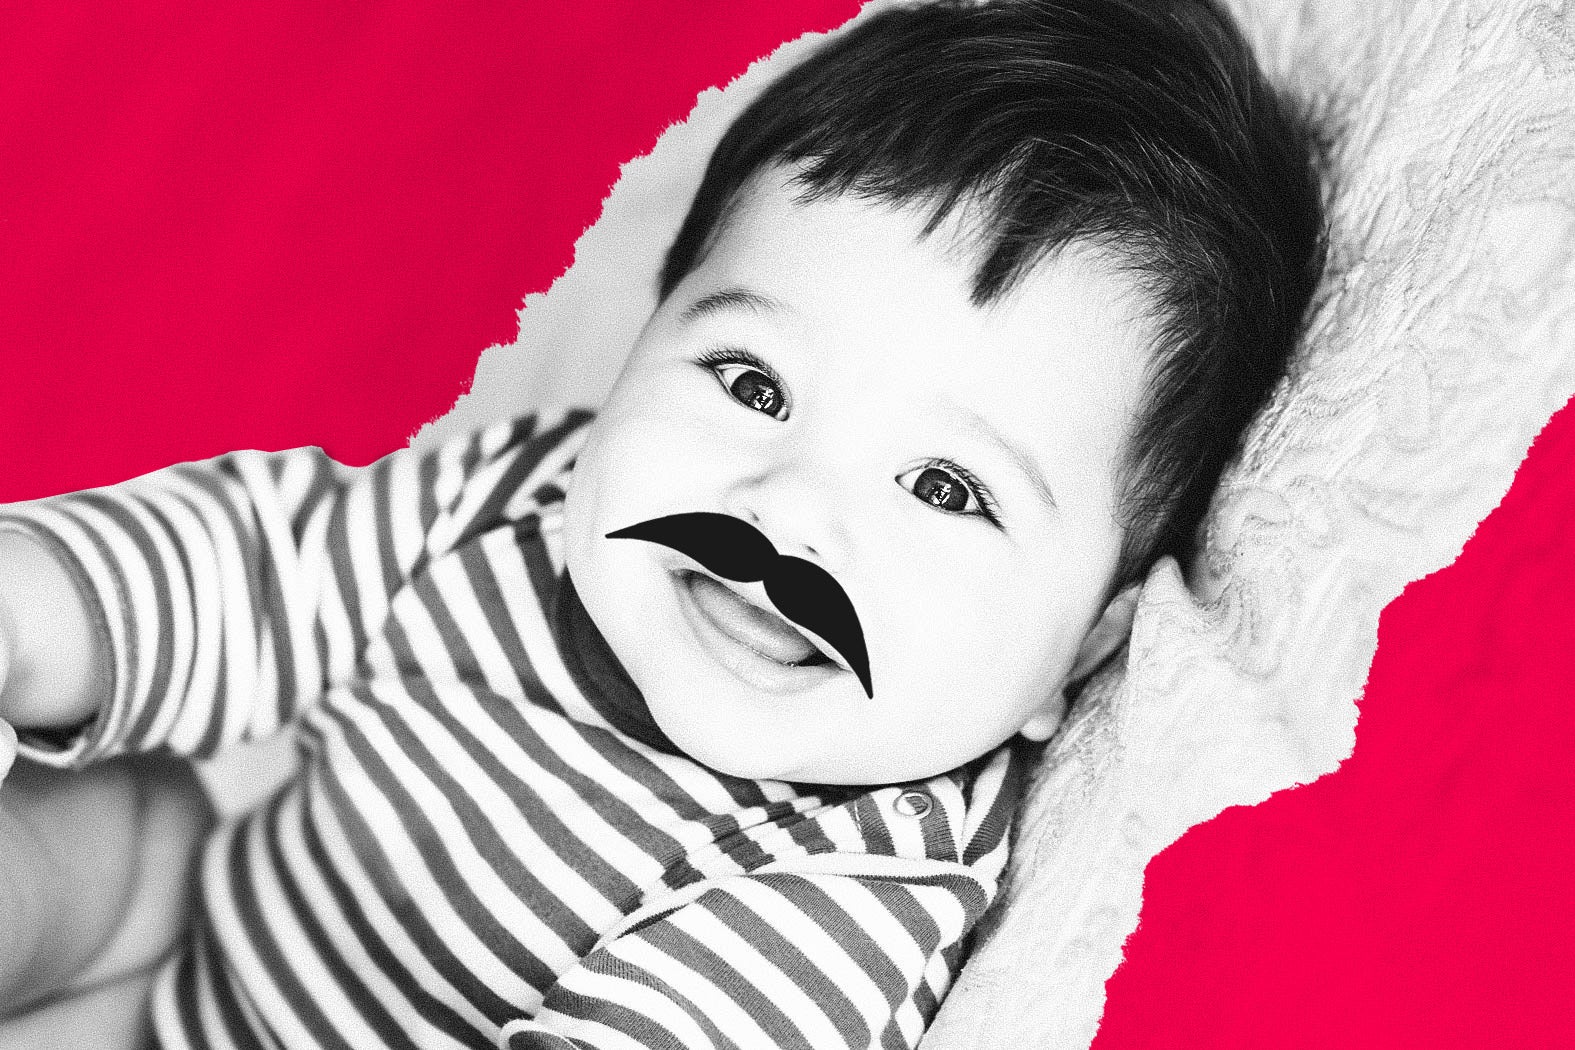 A baby with a large mustache.